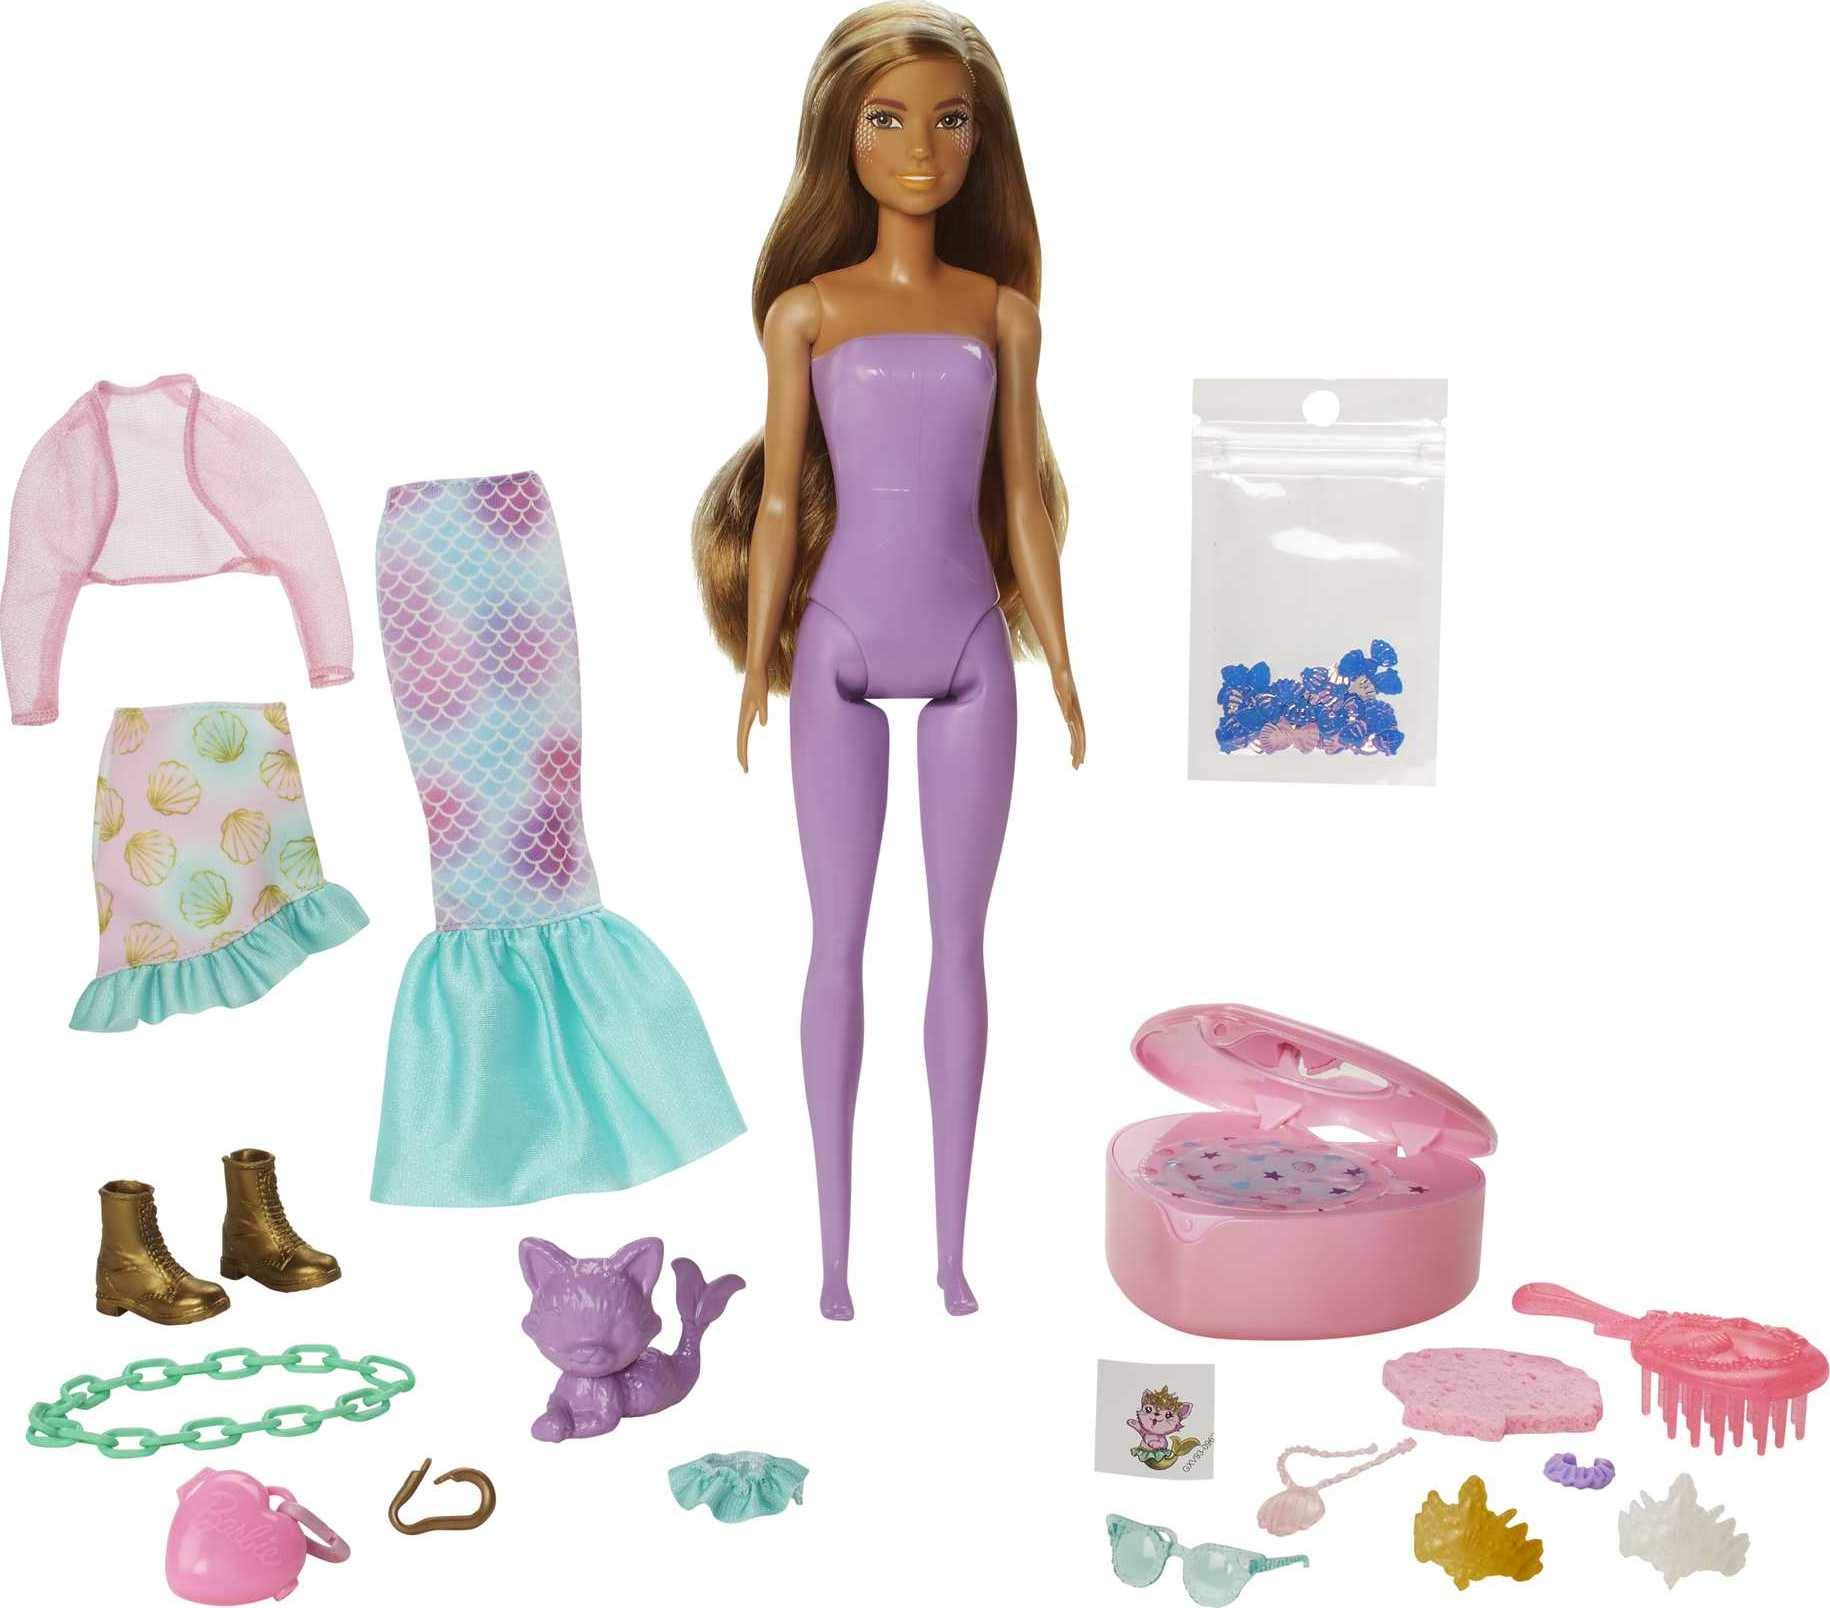 Barbie Color Reveal Peel Mermaid Fashion Reveal Doll Set with 25 Surprises Including Purple Peel-able Doll & Pet & 16 Mystery Bags with Clothes & Accessories for 2 Mermaid-Inspired Looks